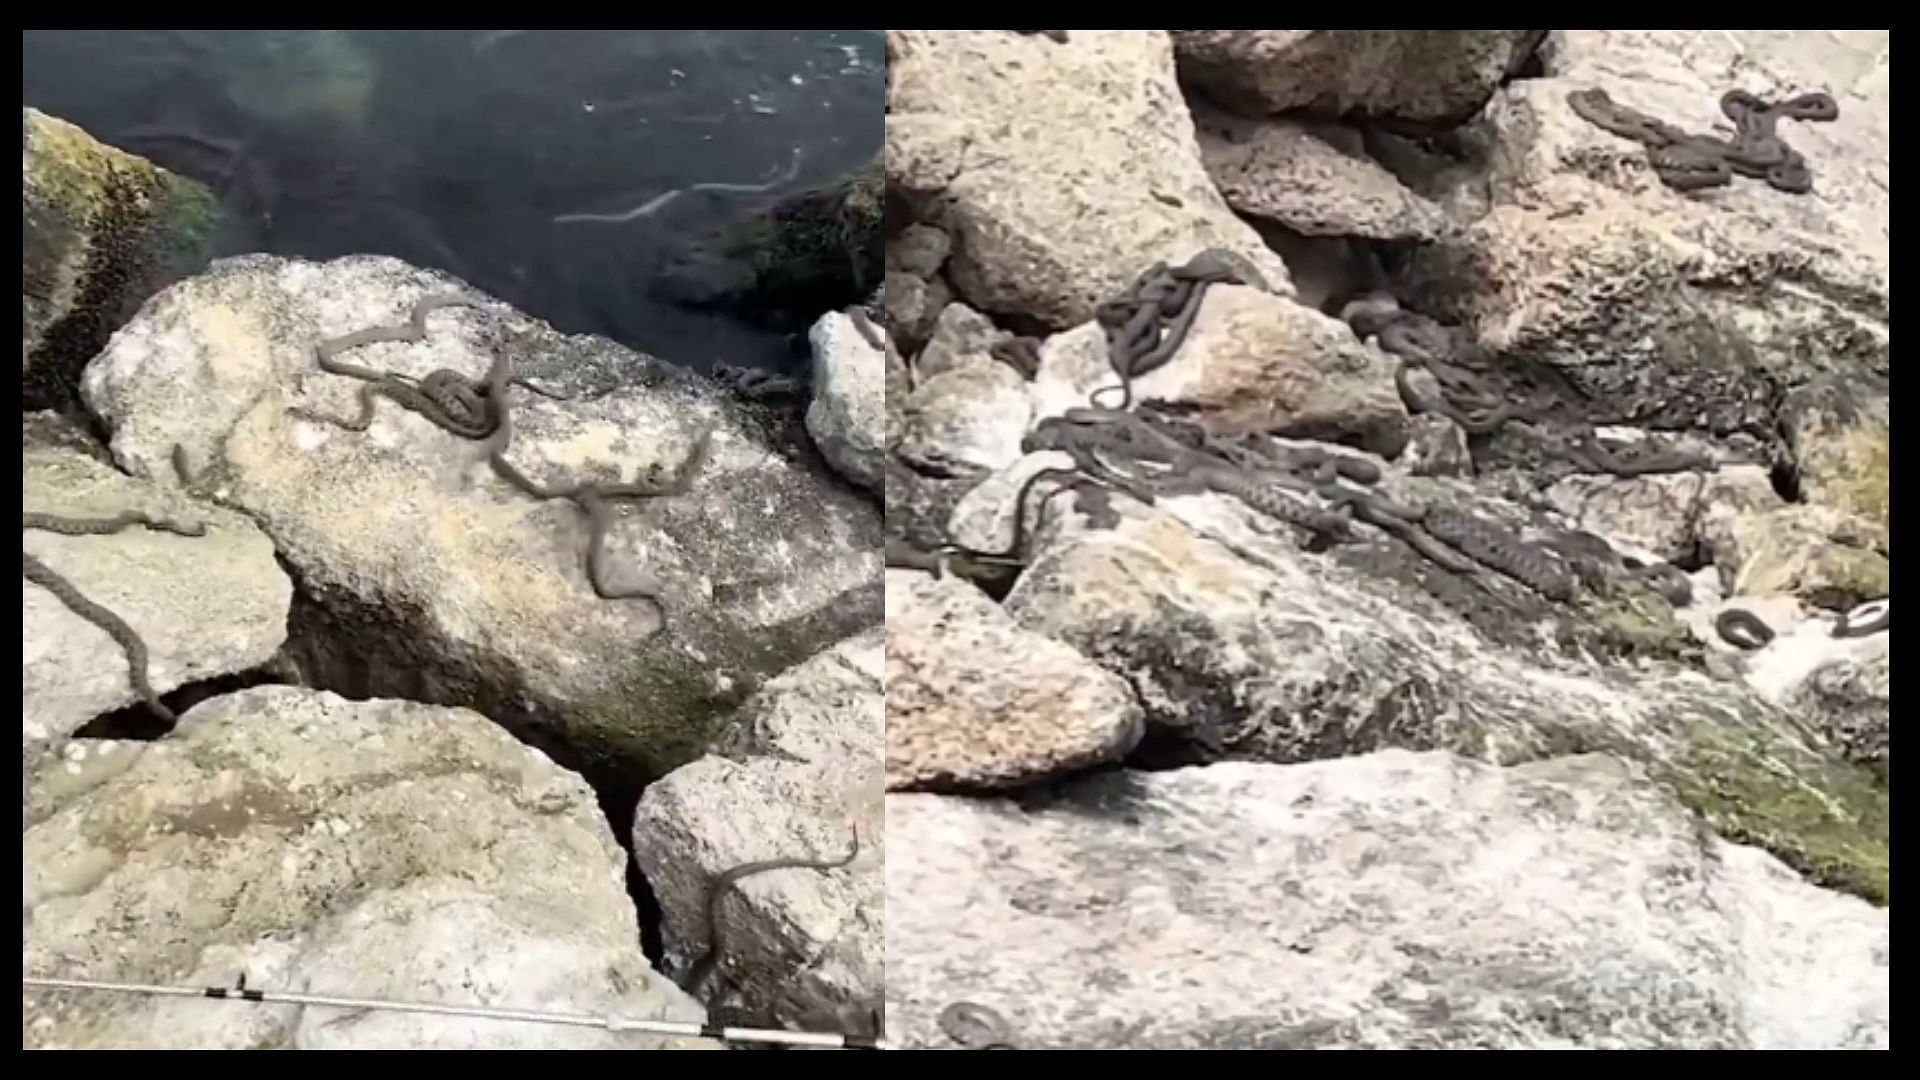 Island of snakes saw thousands of snakes crawling everywhere video viral on social media